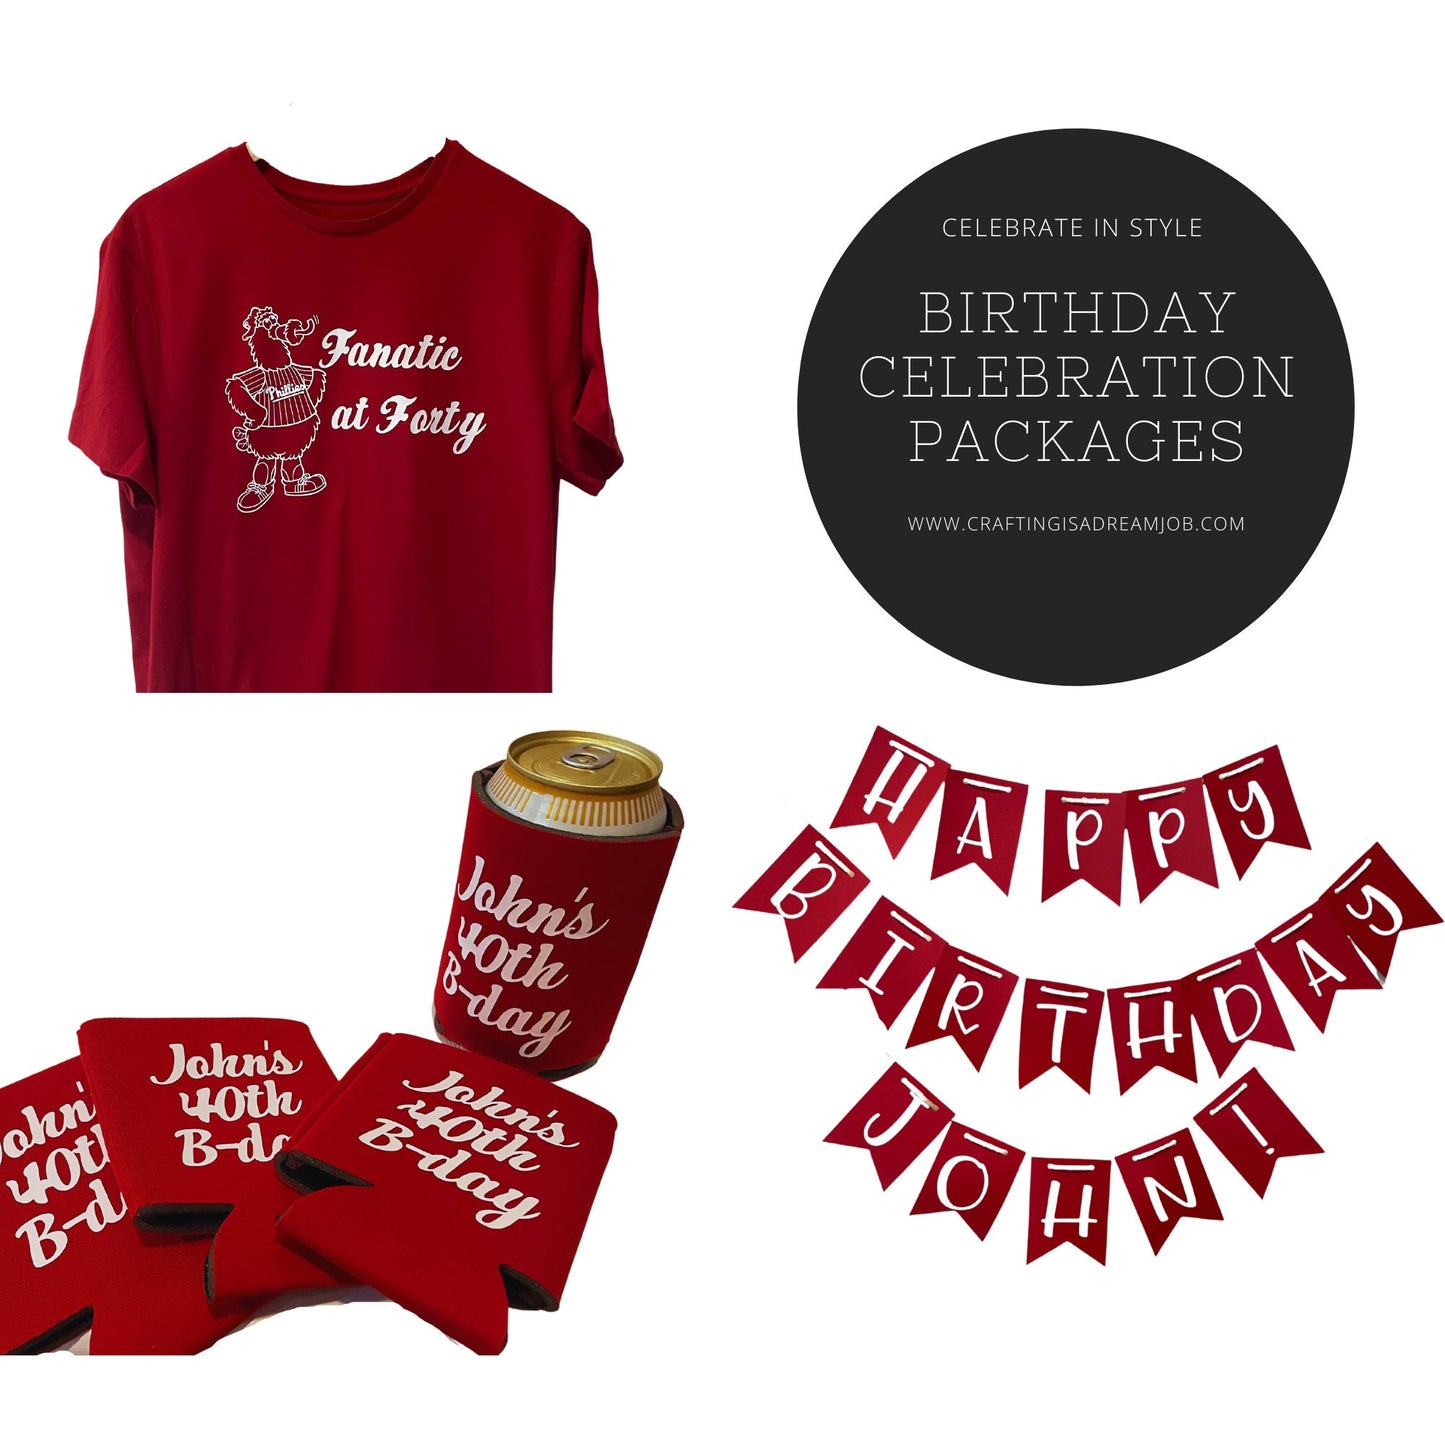 Birthday celebration party package - Personalized and Custom made to order